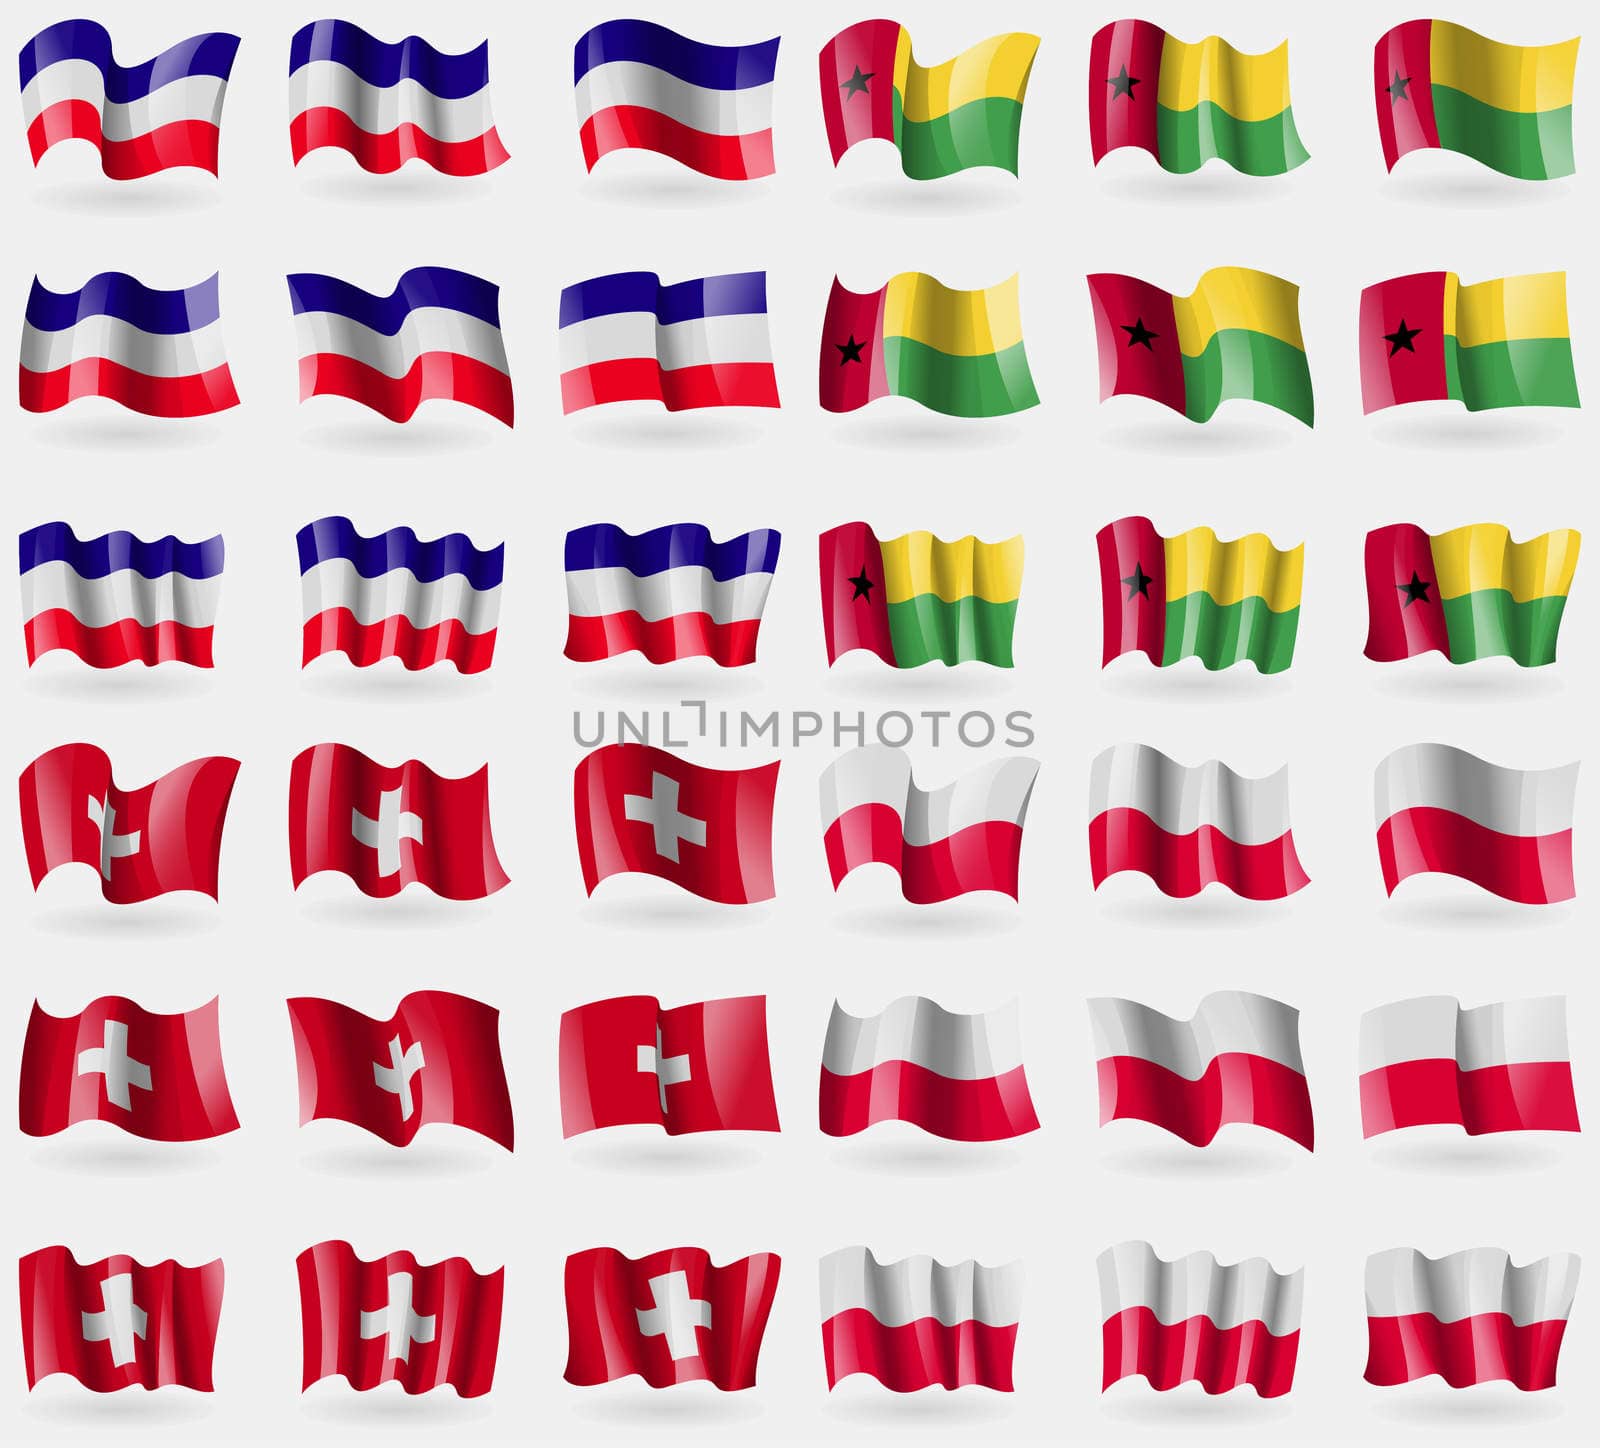 Los Altos, GuineaBissau, Switzerland, Poland. Set of 36 flags of the countries of the world. illustration